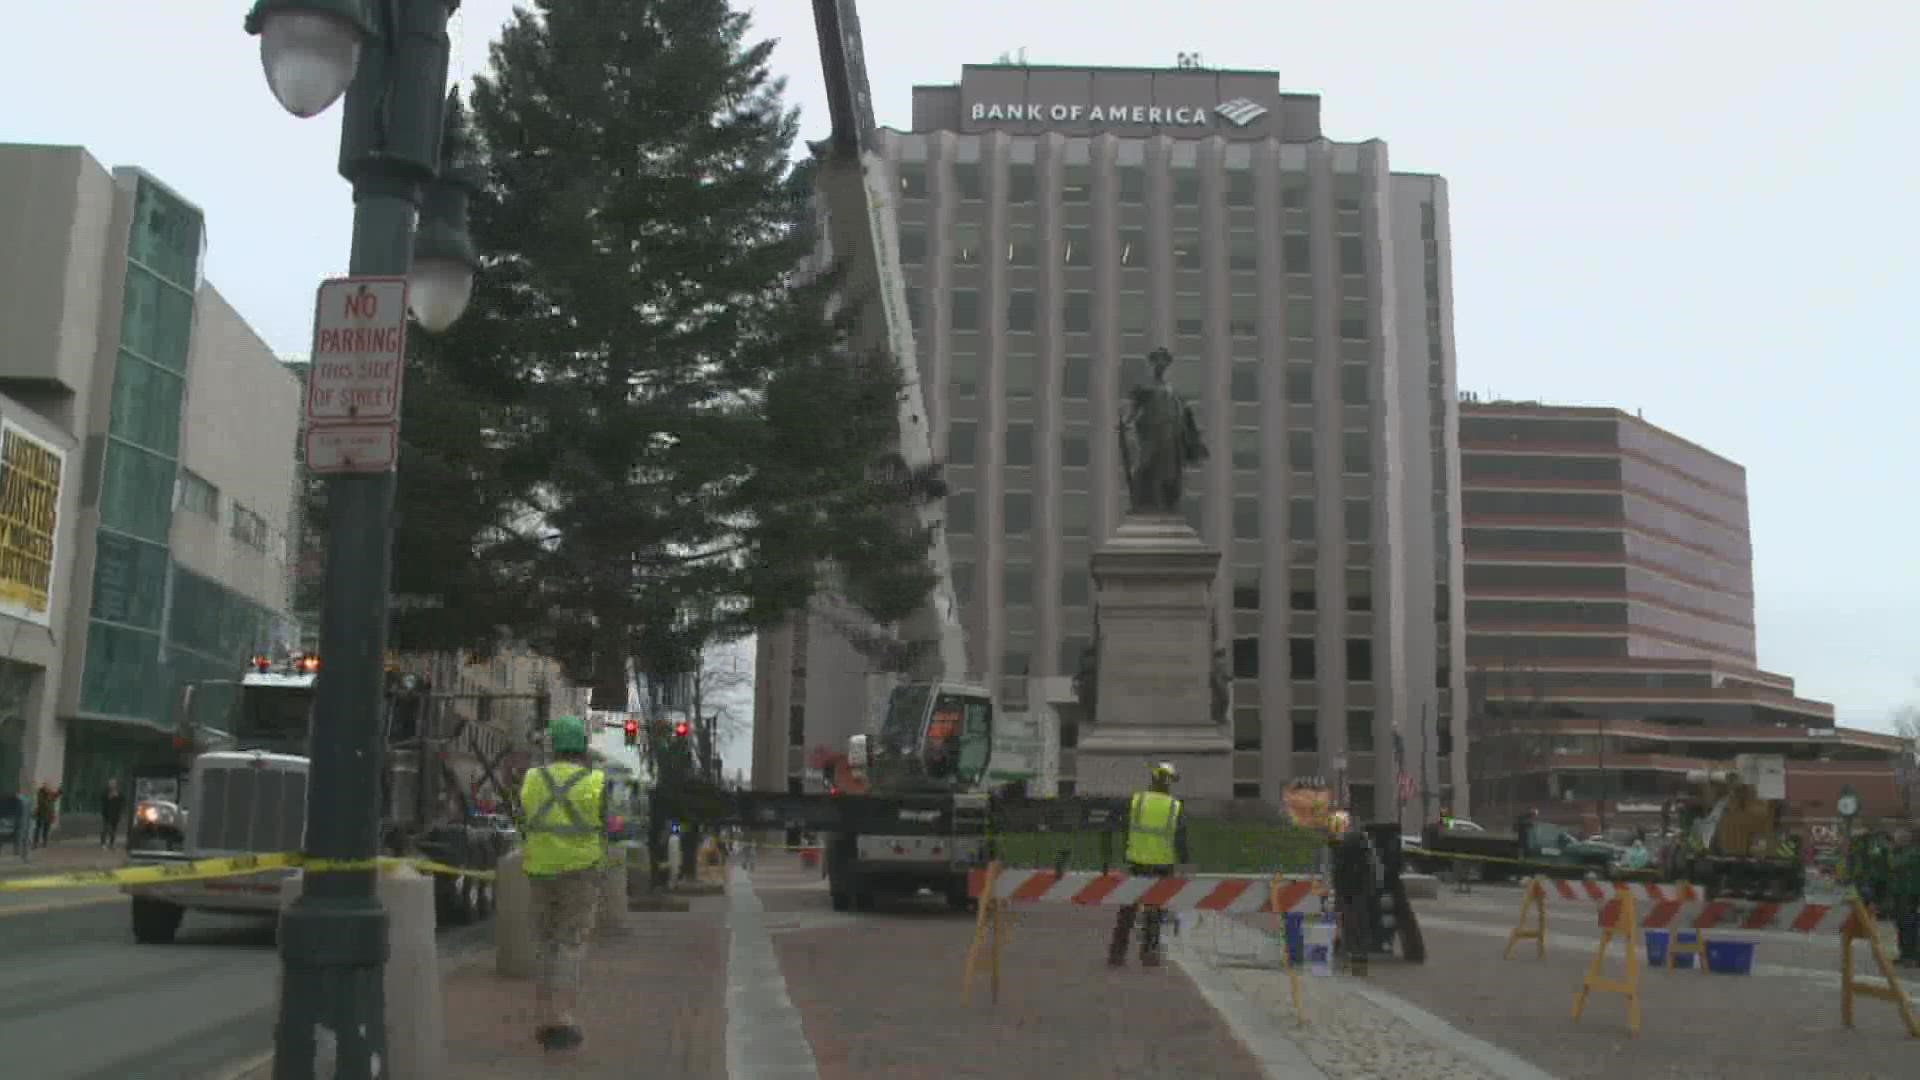 While thousands of passersby will enjoy the tree, it carries a special meaning for the woman who donated it.